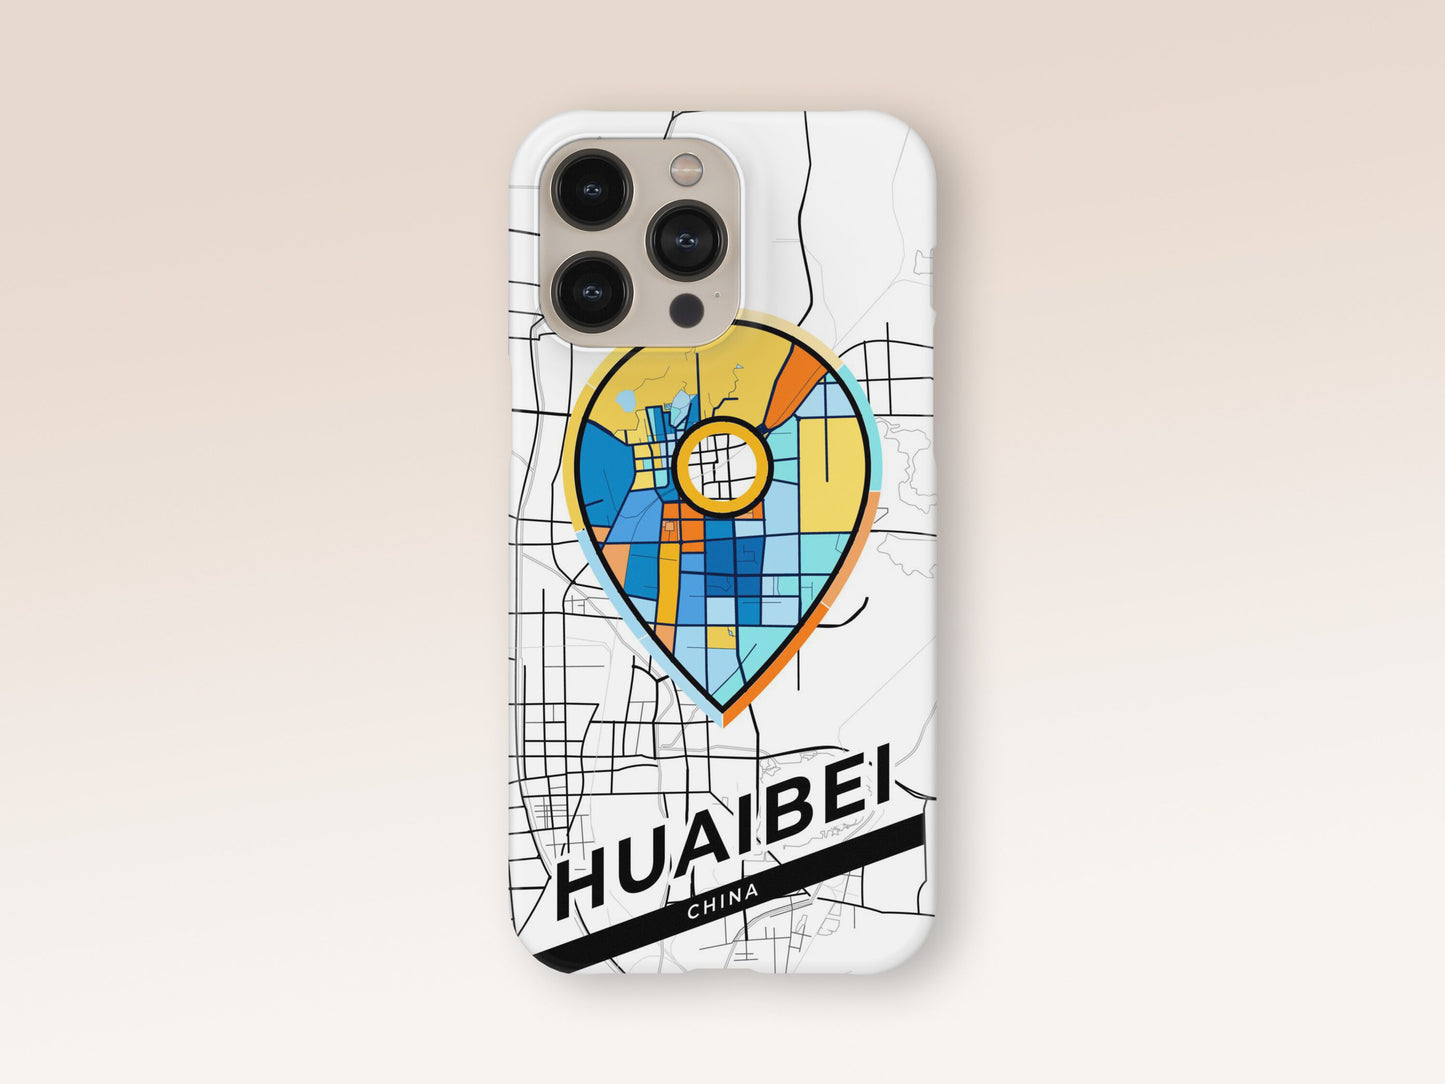 Huaibei China slim phone case with colorful icon. Birthday, wedding or housewarming gift. Couple match cases. 1